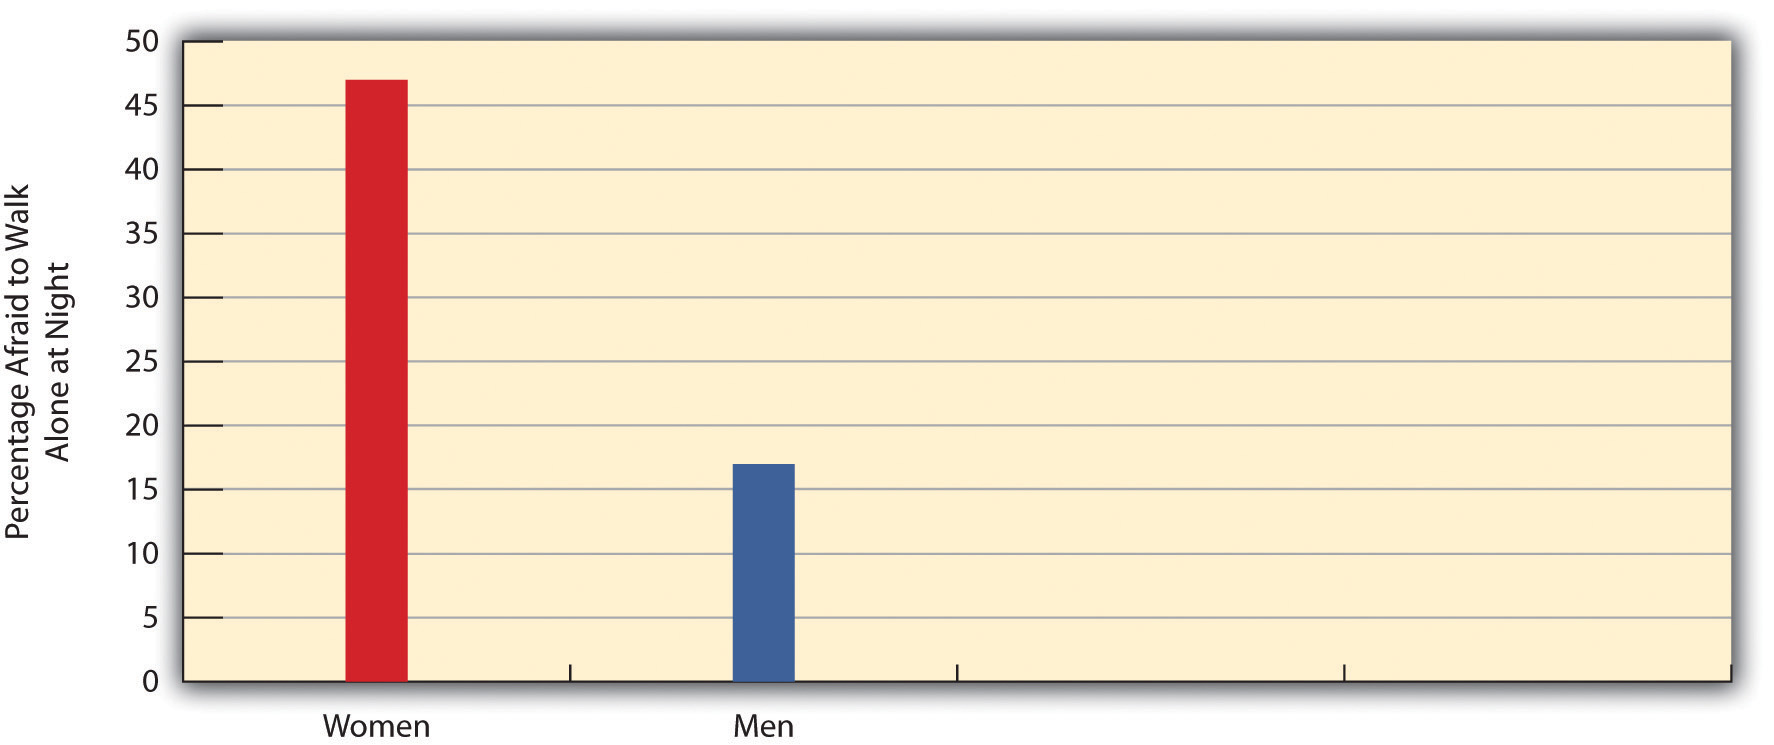 This graph of gender and fear of crime shows that women are much more fearful than men